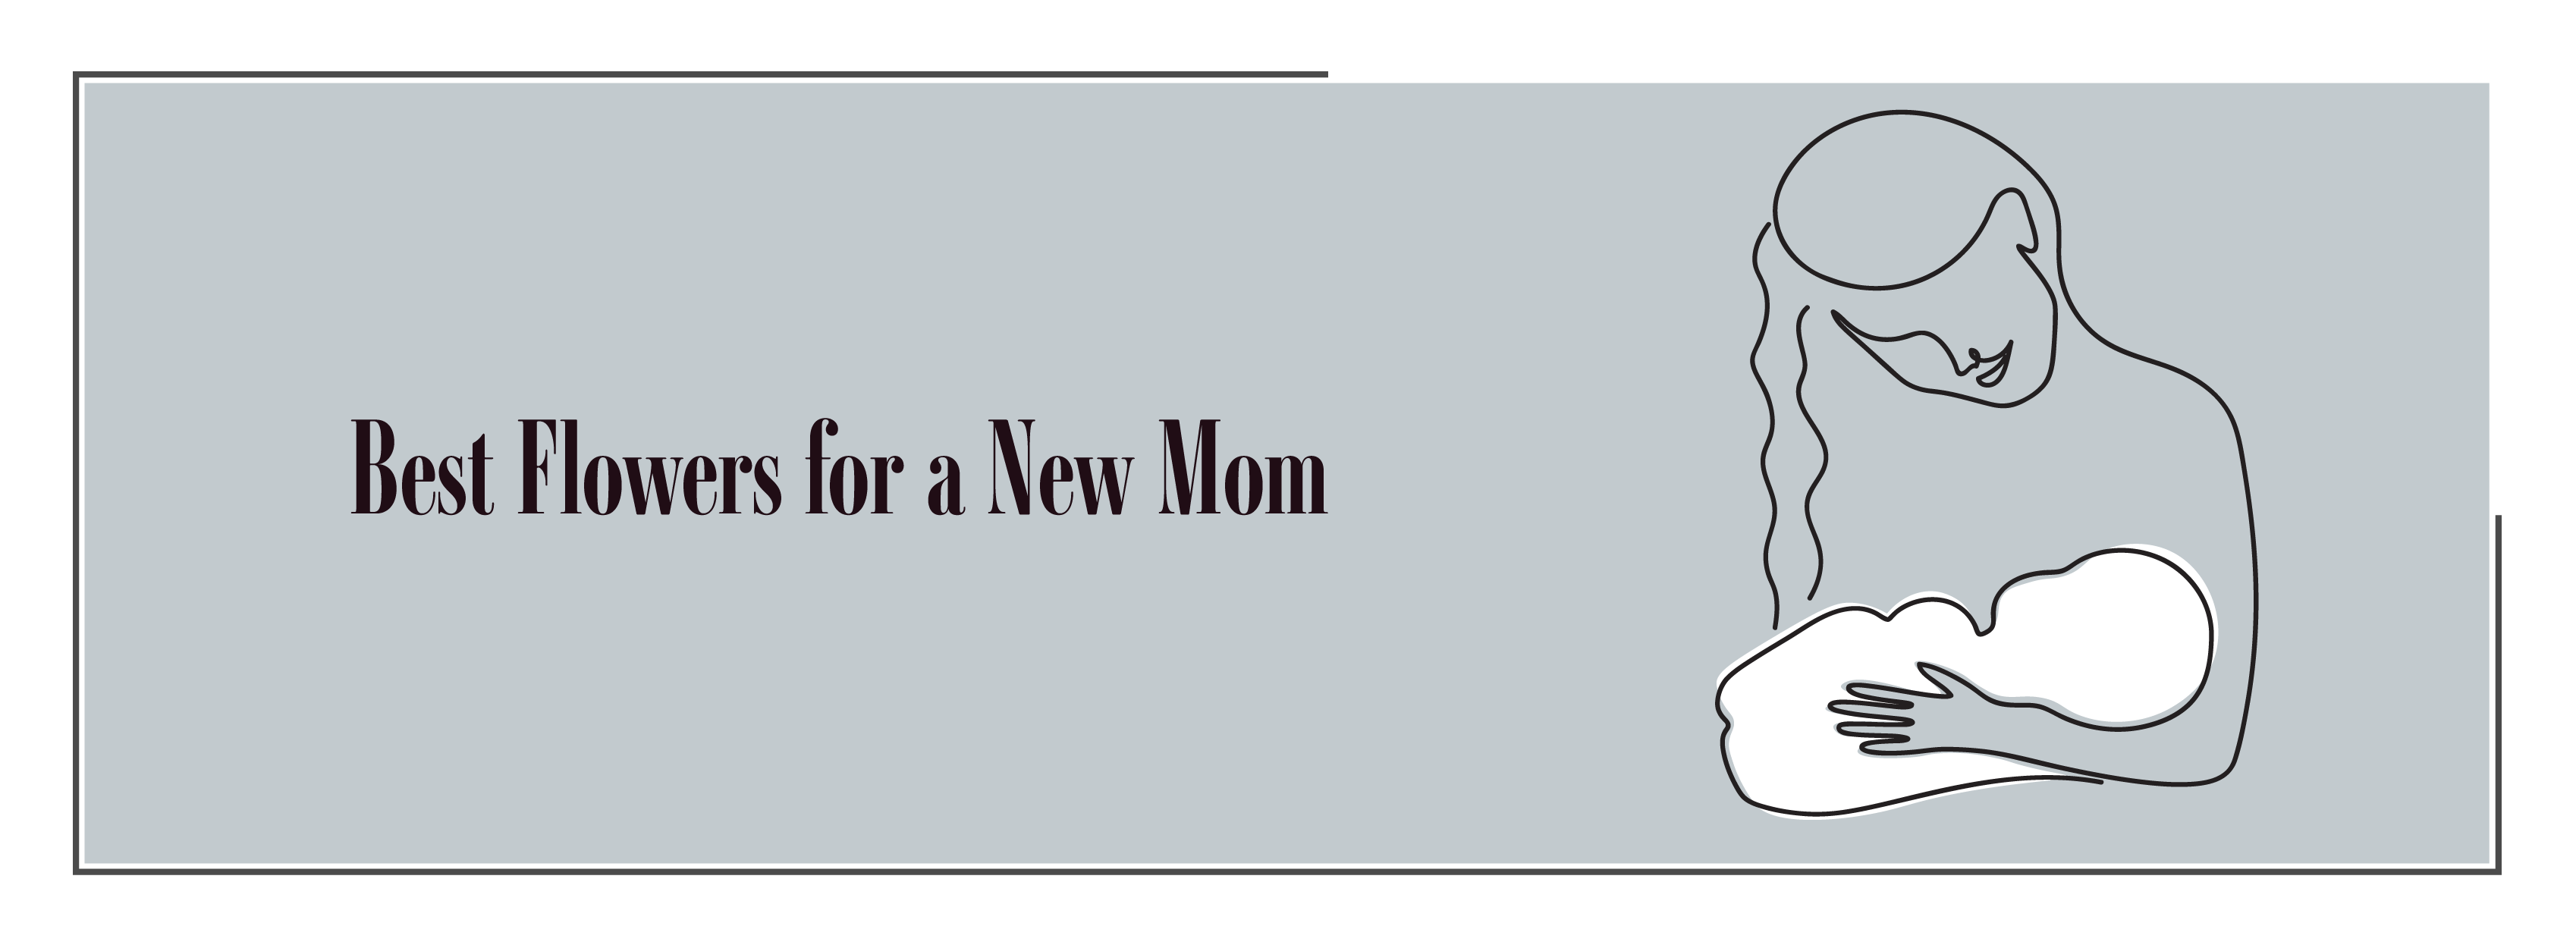 Best Flowers for a new mom